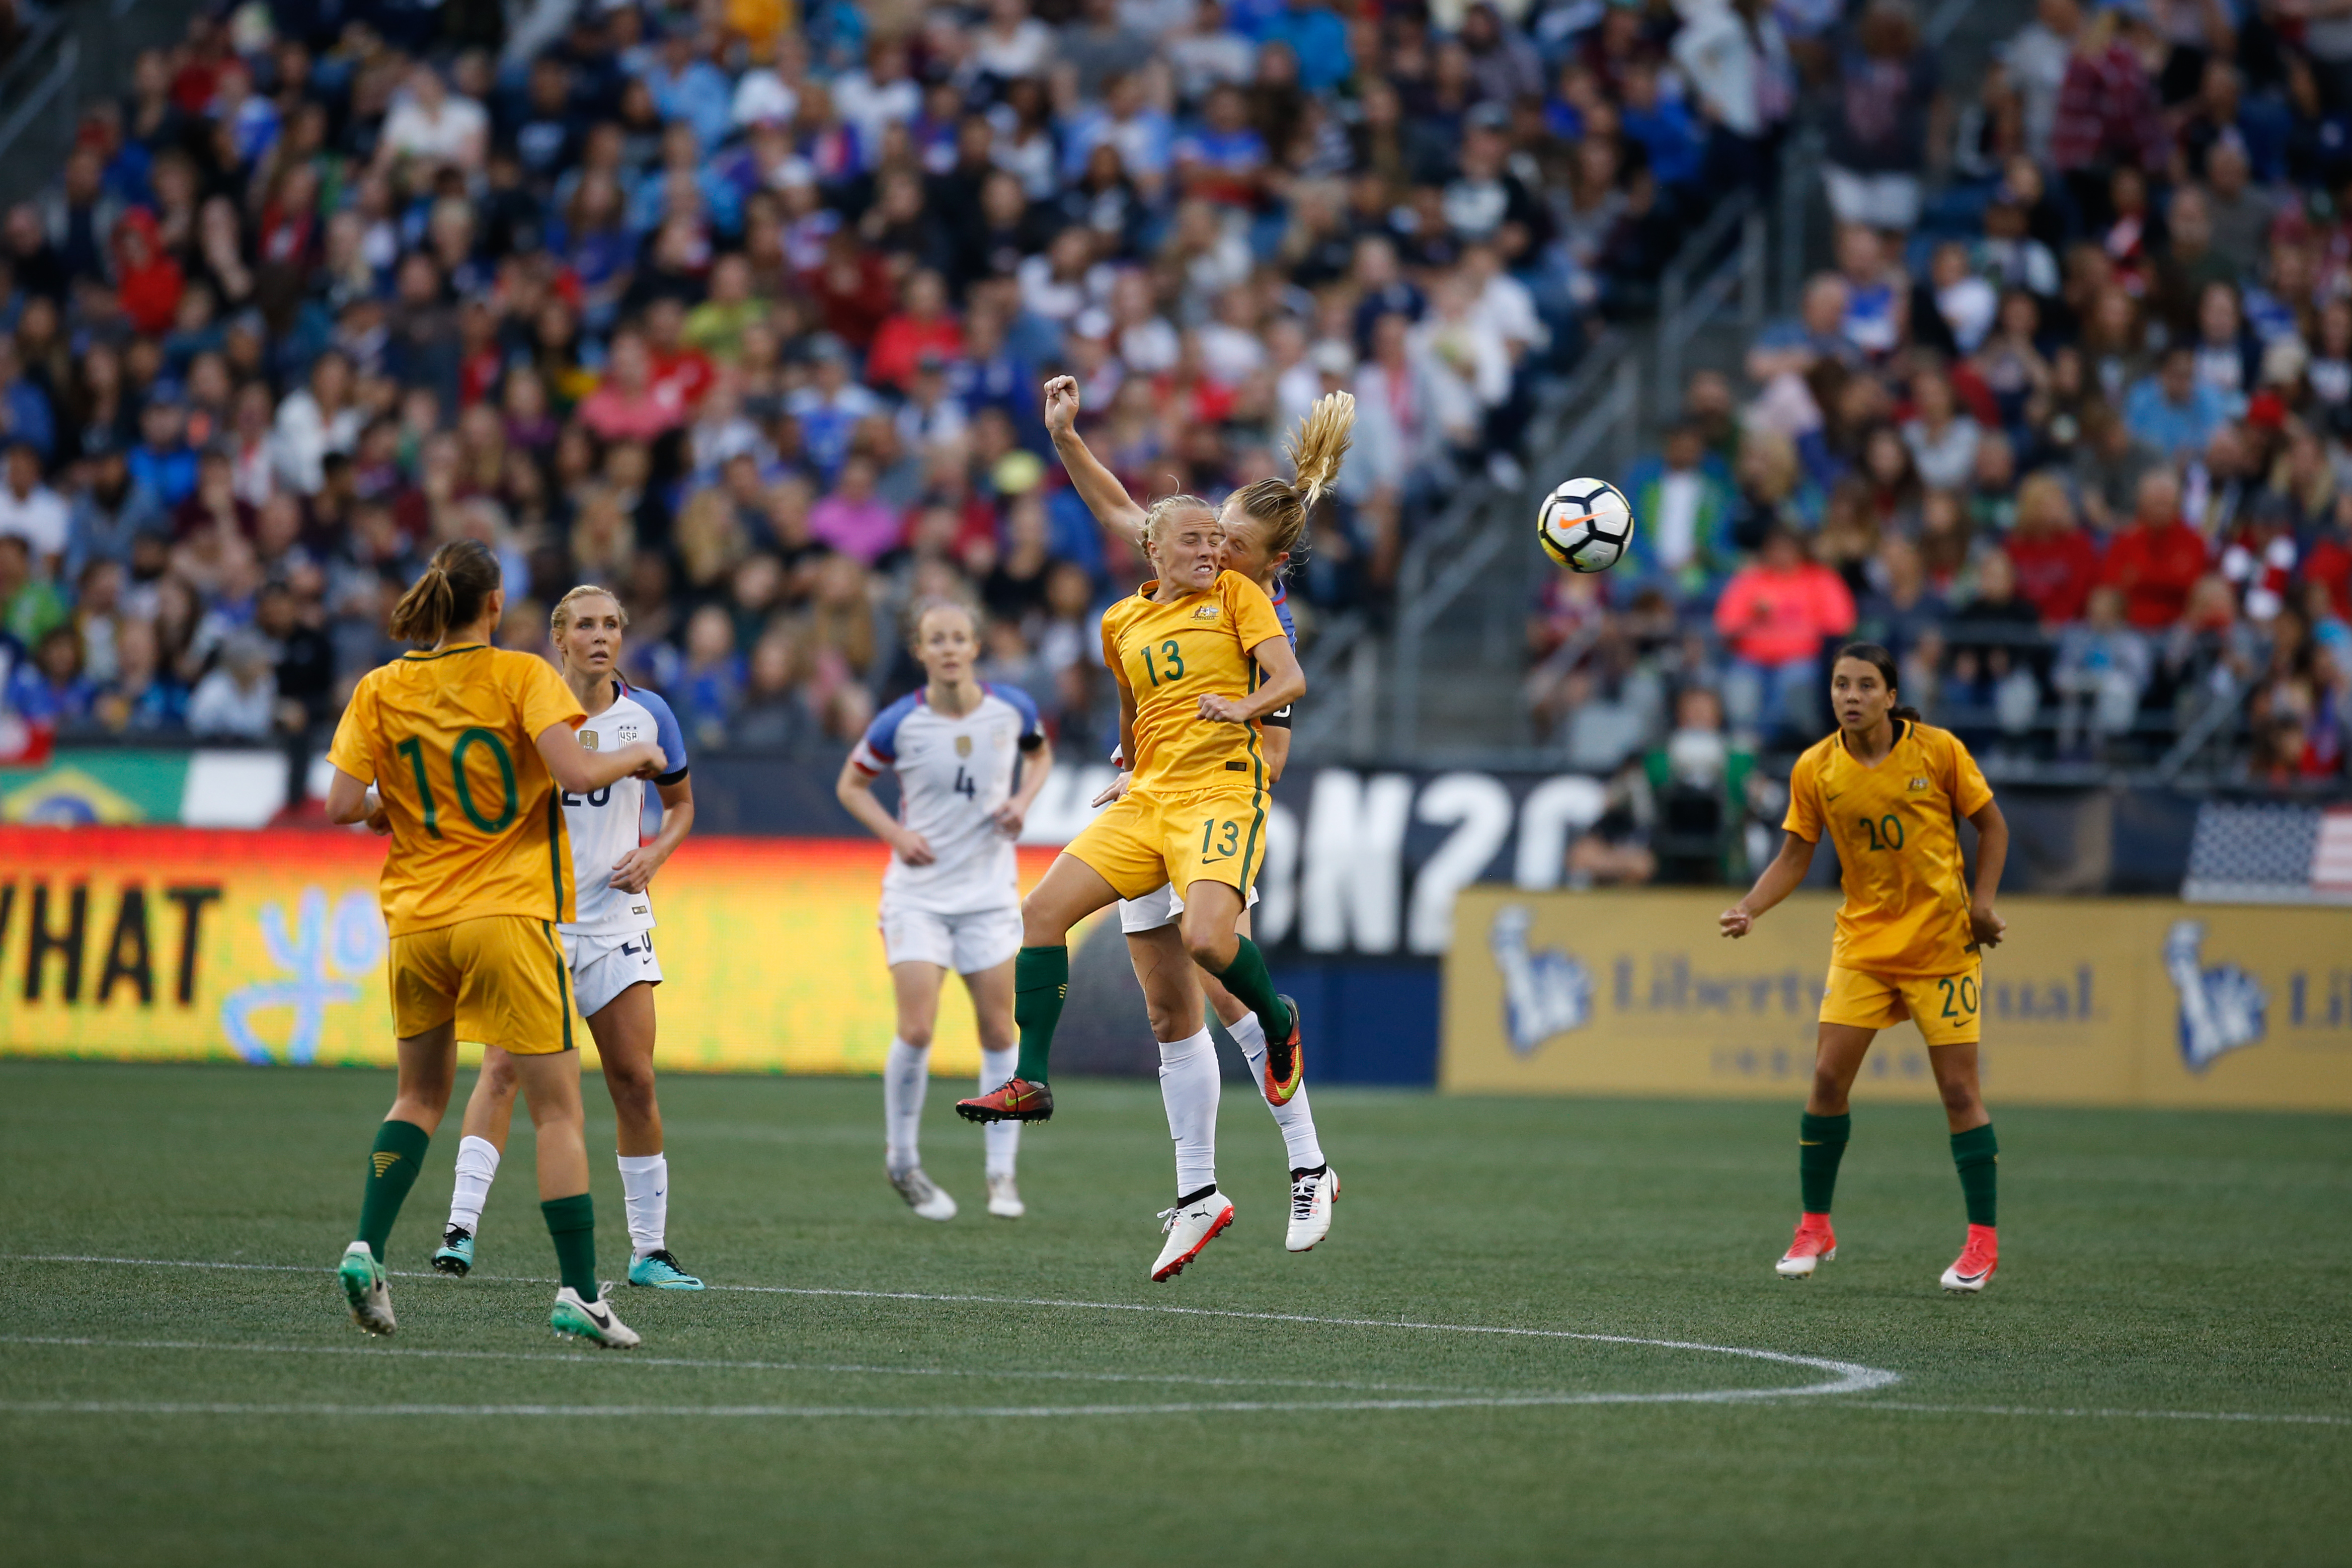 Tameka Butt in action for the Australians against USA at the ToN